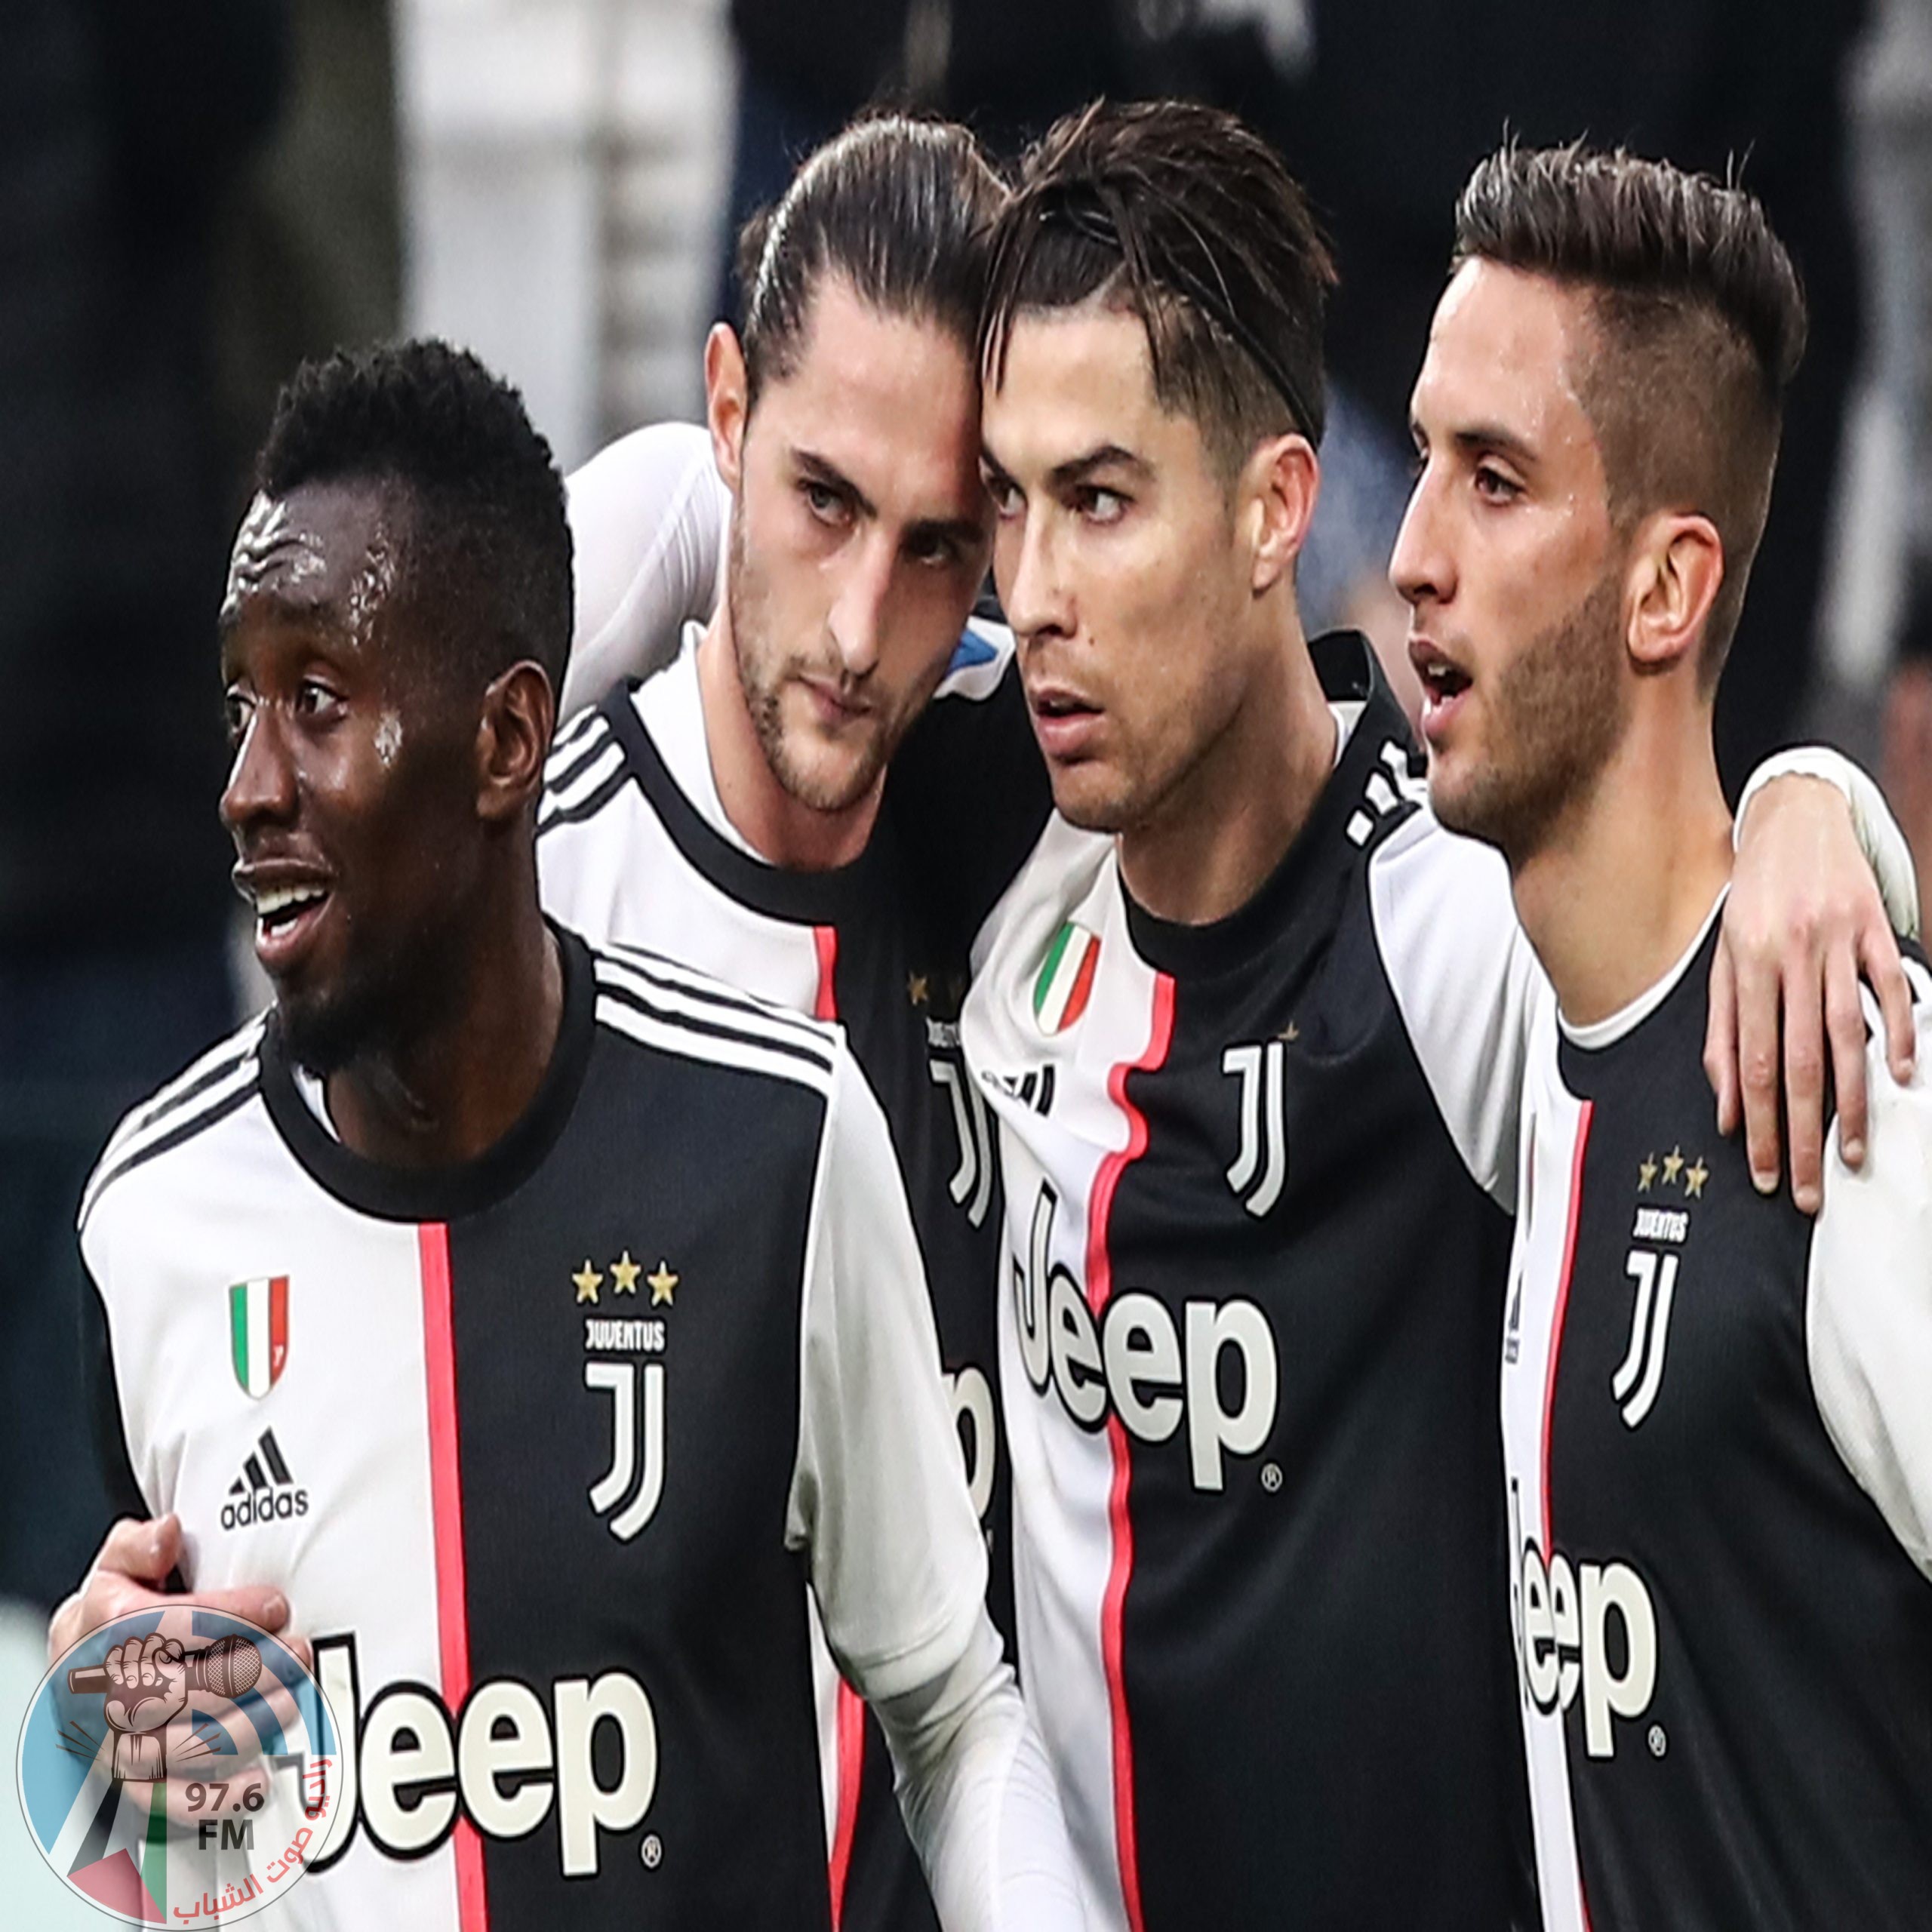 Juventus' Portuguese forward Cristiano Ronaldo (C) celebrates with (From L) Juventus' French midfielder Blaise Matuidi, Juventus' French midfielder Adrien Rabiot and Juventus' Uruguayan midfielder Rodrigo Bentancur after scoring during the Italian Serie A football match Juventus vs Udinese on December 15, 2019 at the Juventus Allianz stadium in Turin. (Photo by Isabella BONOTTO / AFP)